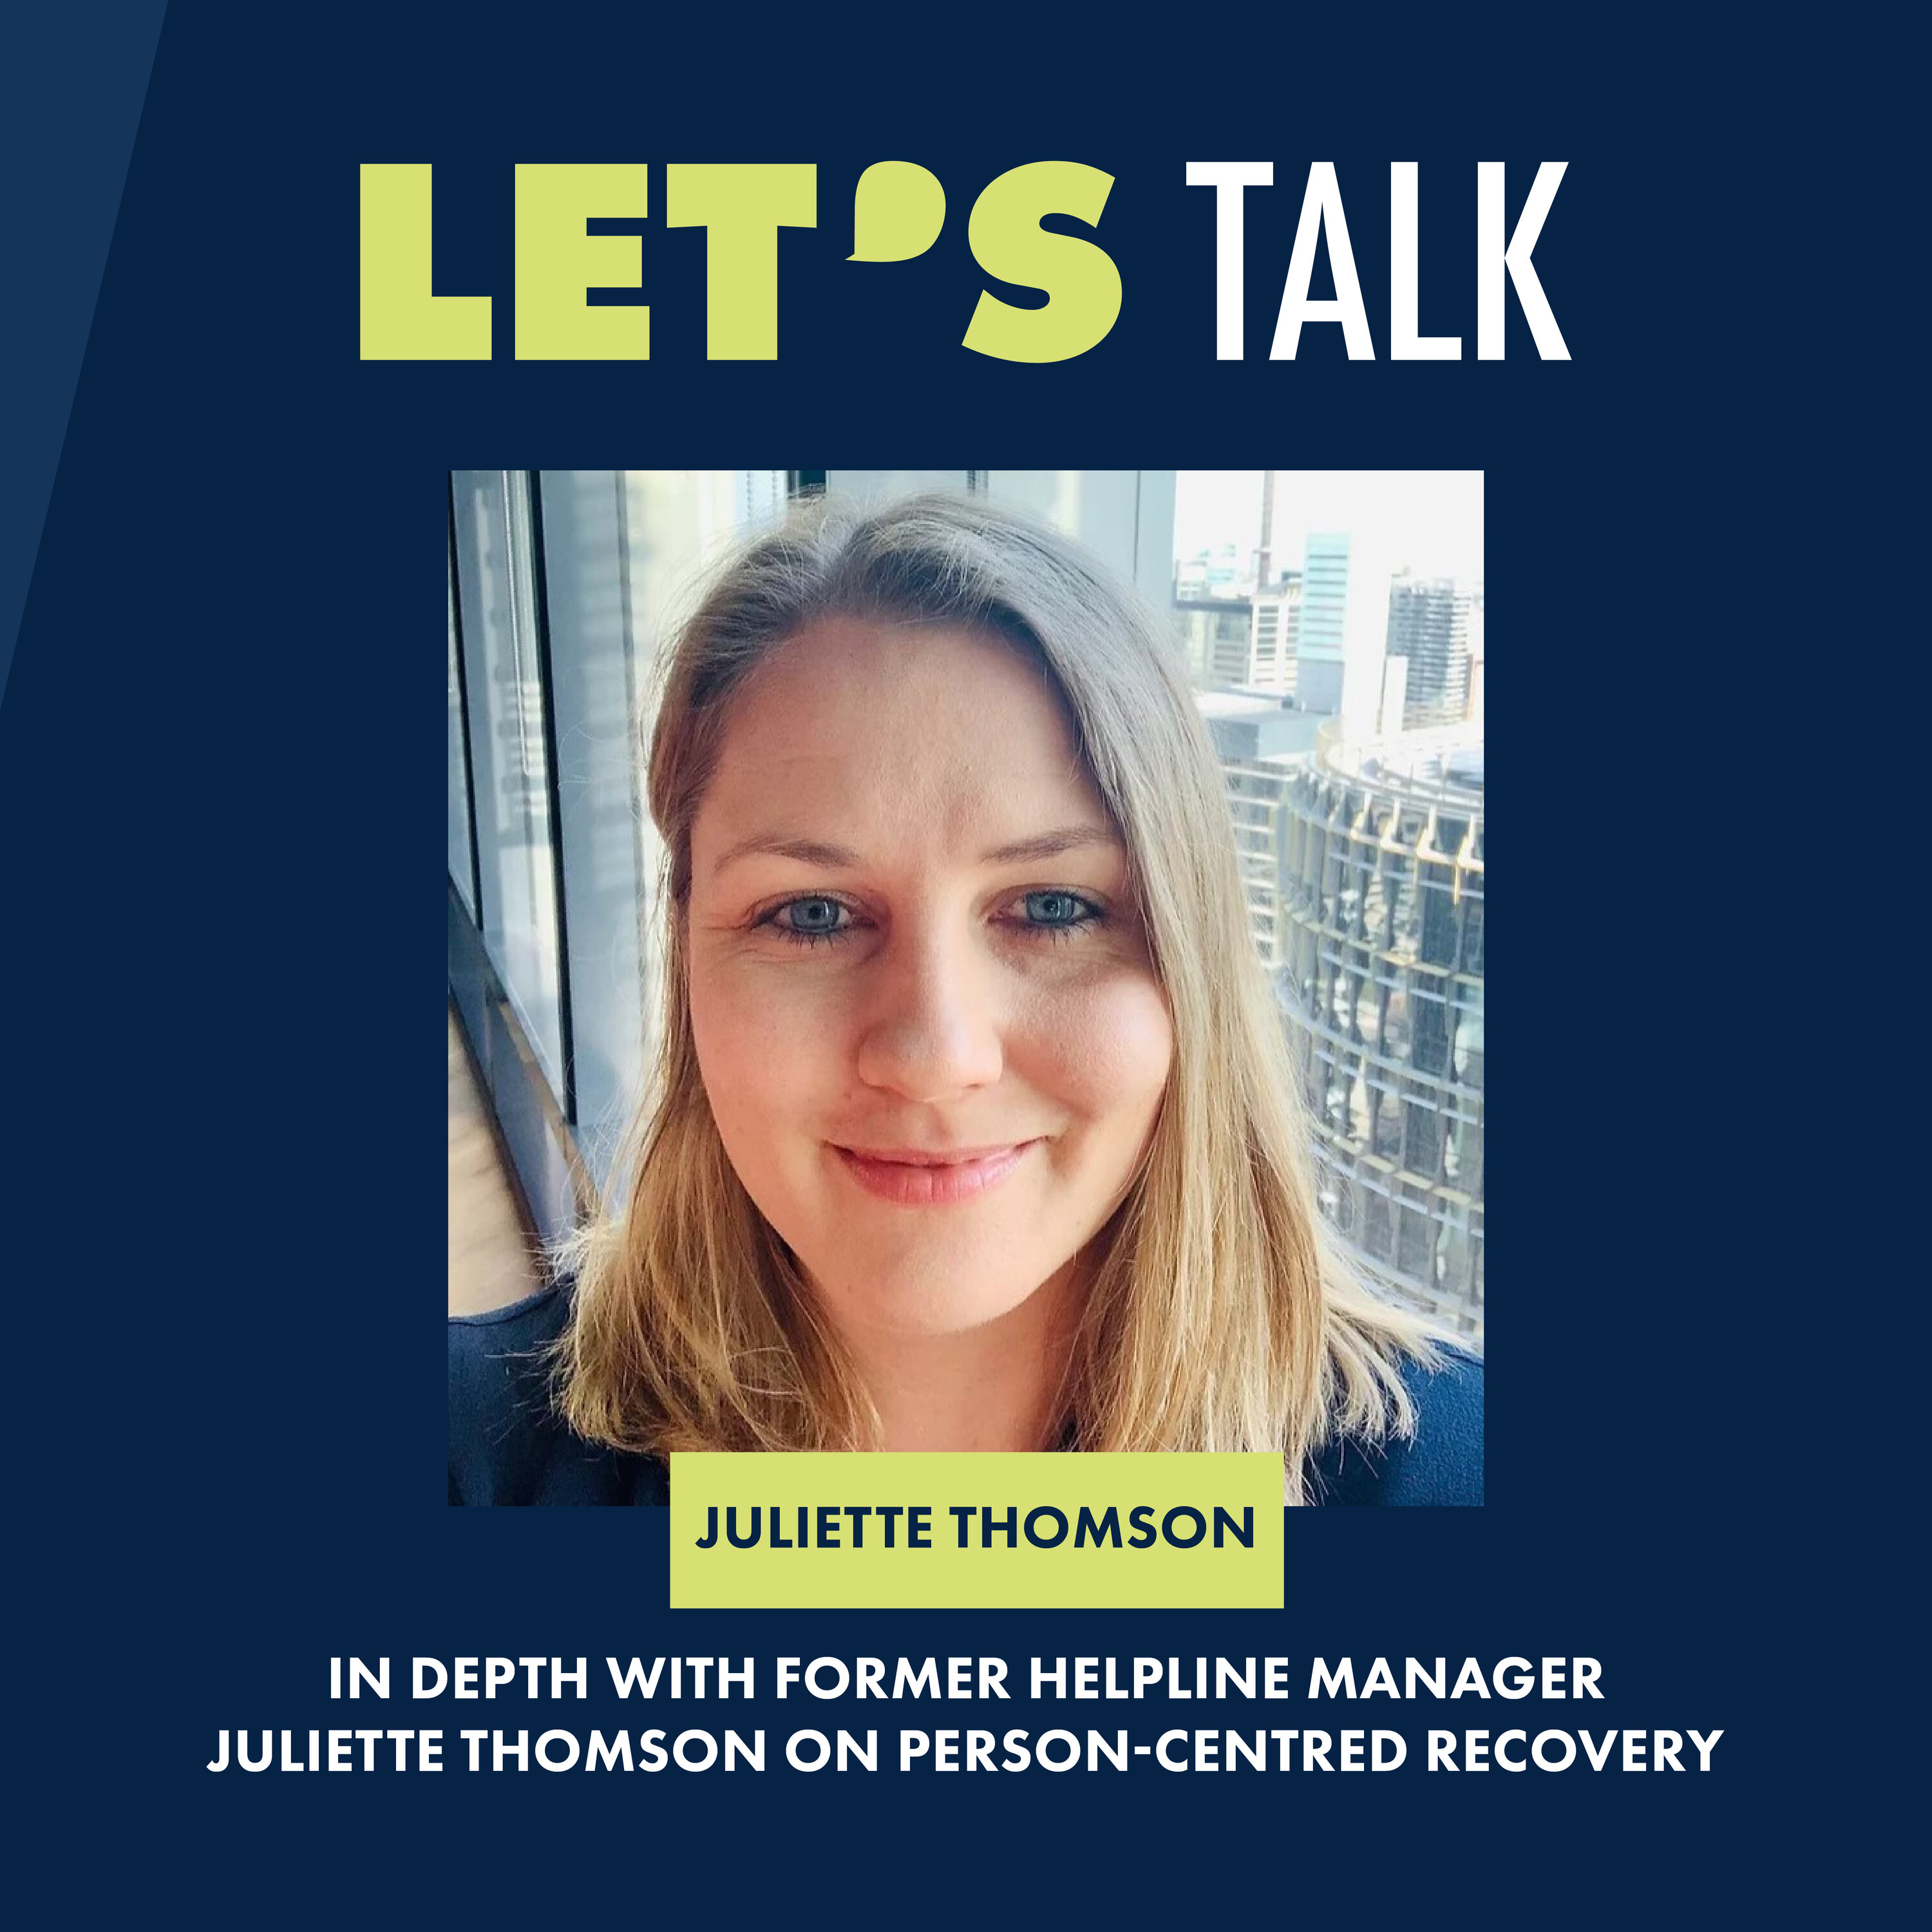 In depth with former helpline manager Juliette Thomson on person-centred recovery